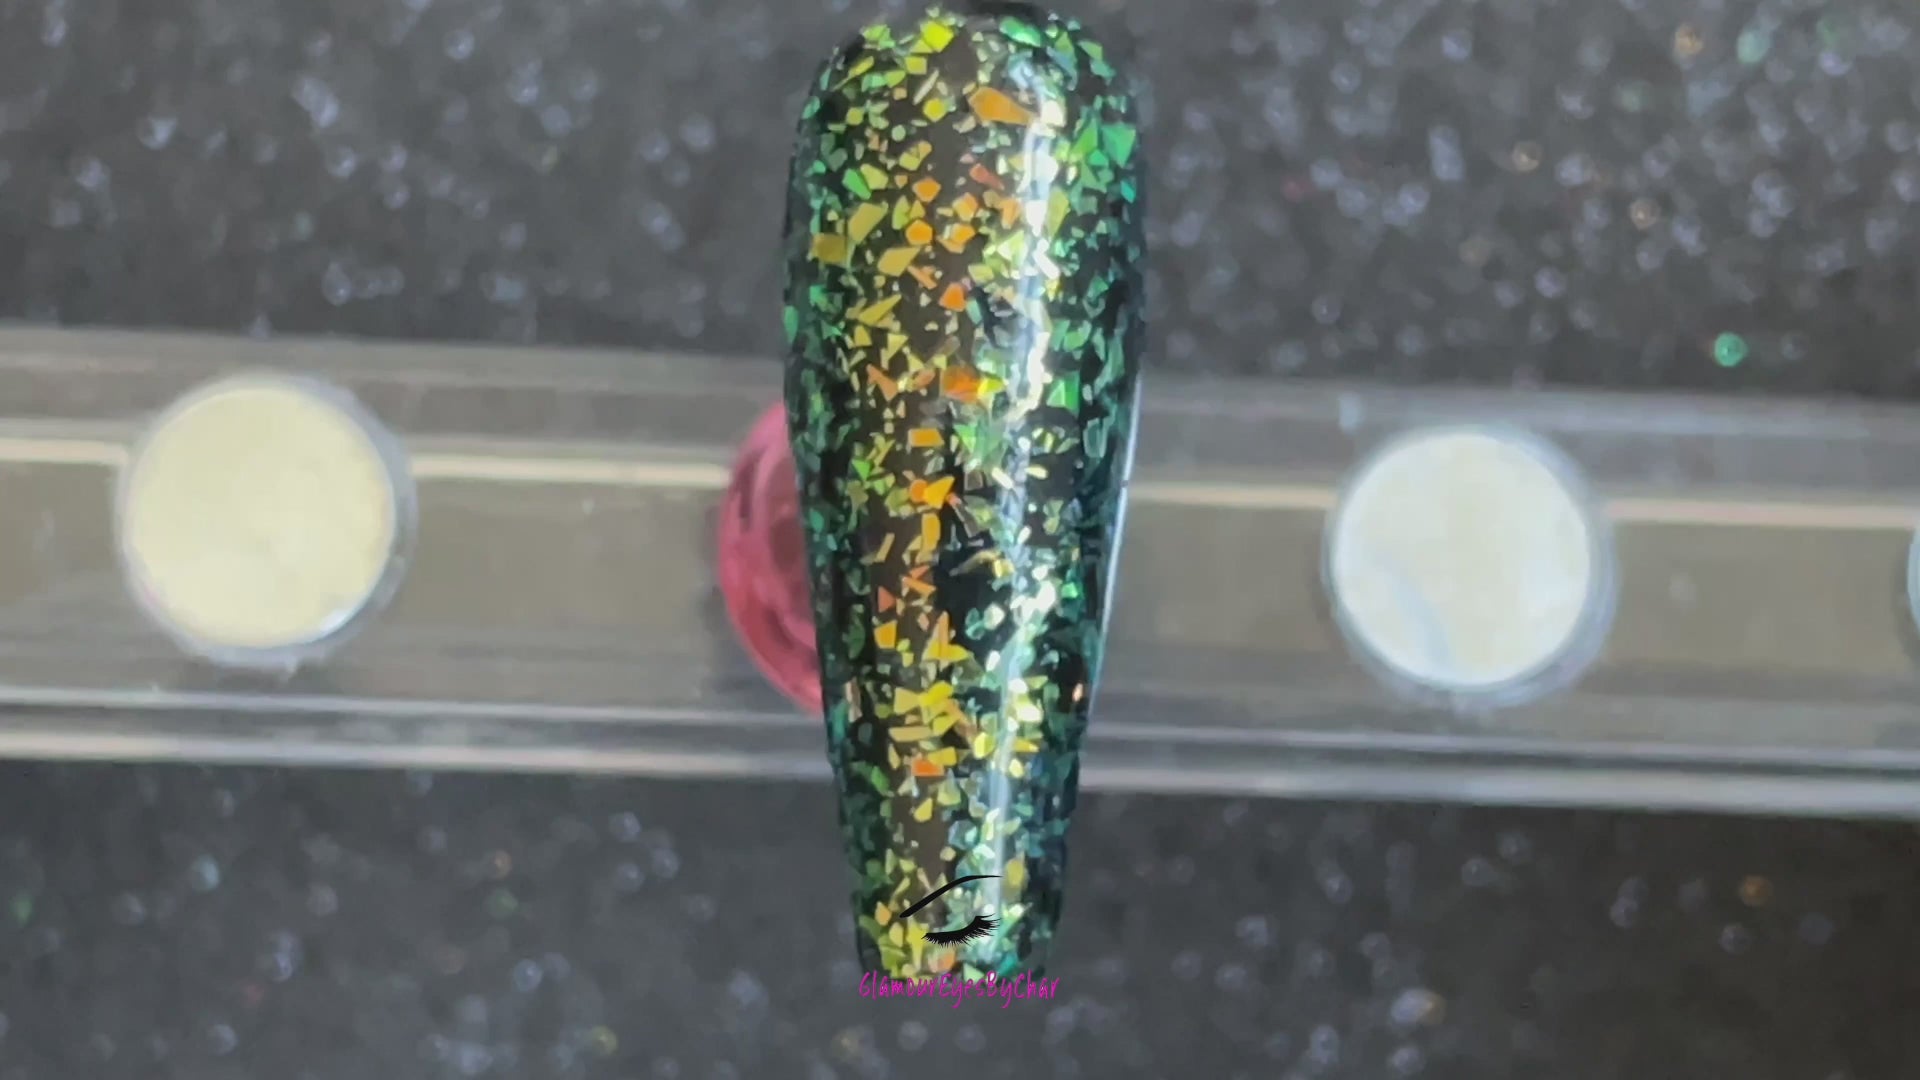 This glitter is called Greentini and is part of the cellophane glitter flakes collection. It consists of bright green iridescent glitter shards with golden reflects. Greentini is perfect for body and nail art, glitter slime, resin art or DIY projects. Available in 5g jars only.  